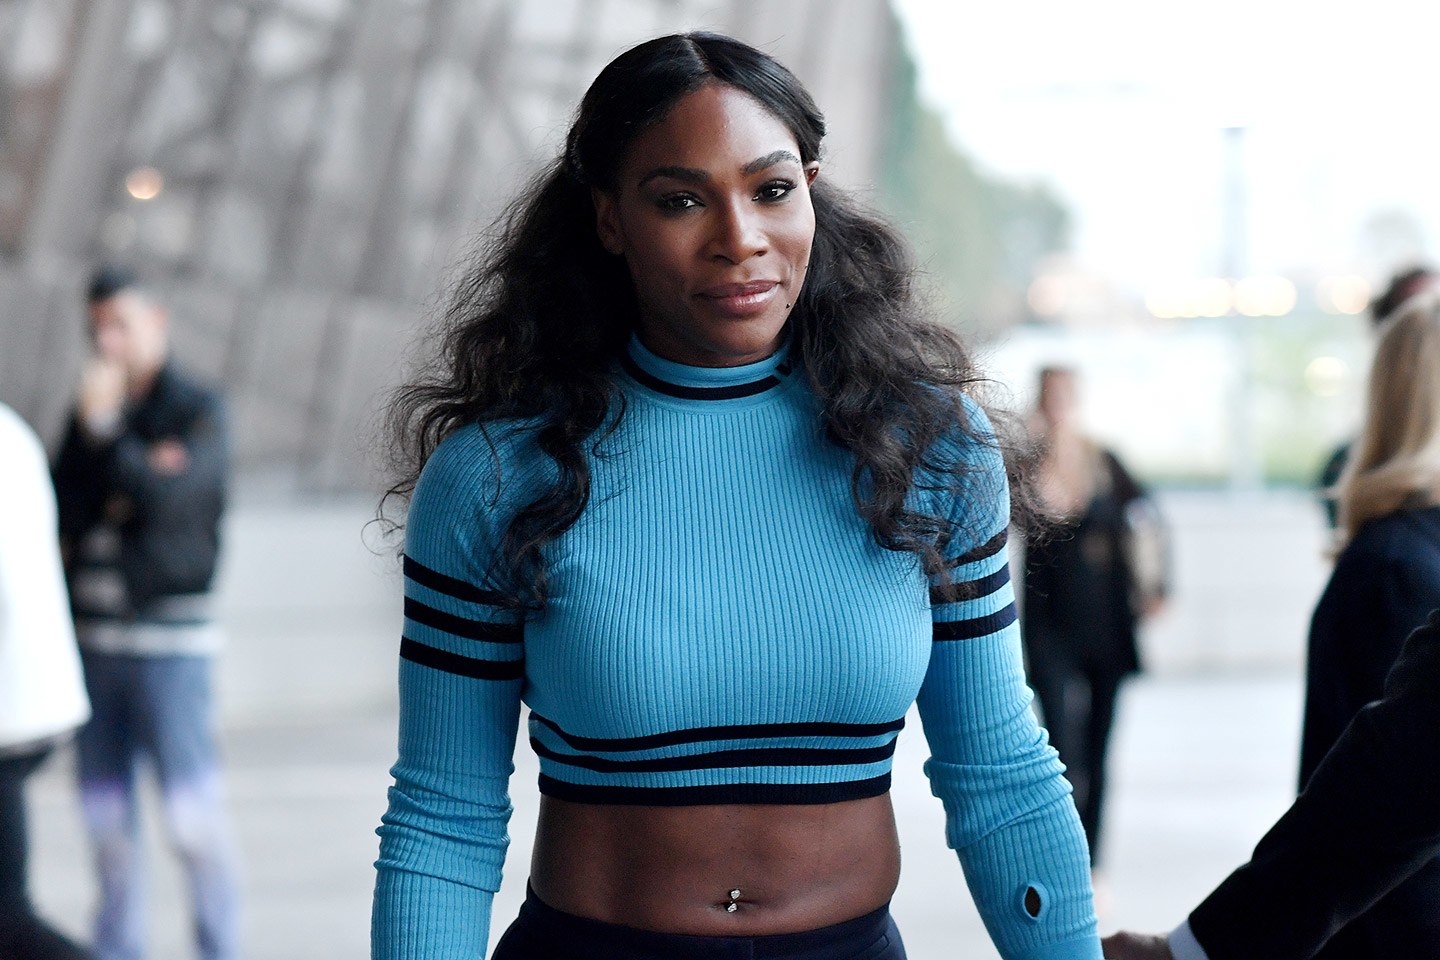 Can Serena Williams Break Records after Giving Birth?